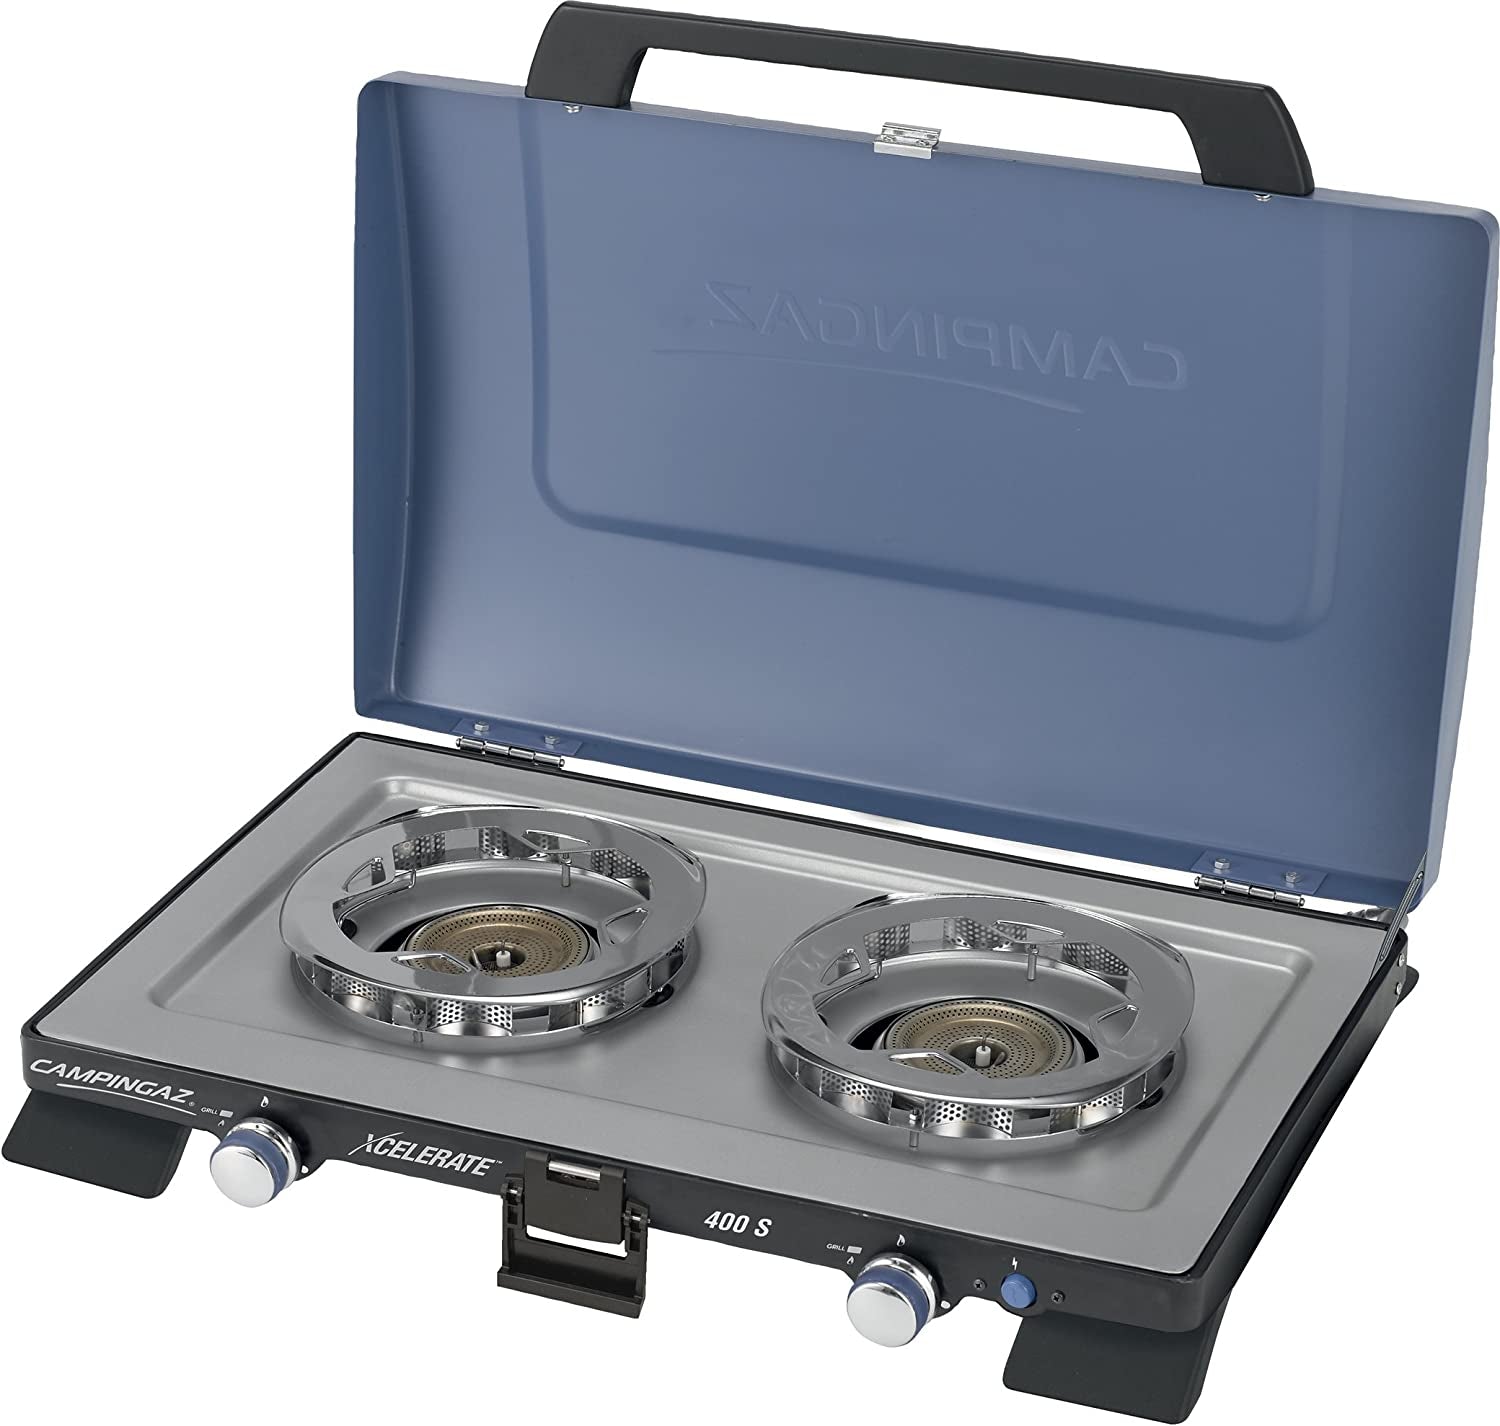 , Portable Two Burner Gas Cooker with Windshield, 4400 Watt